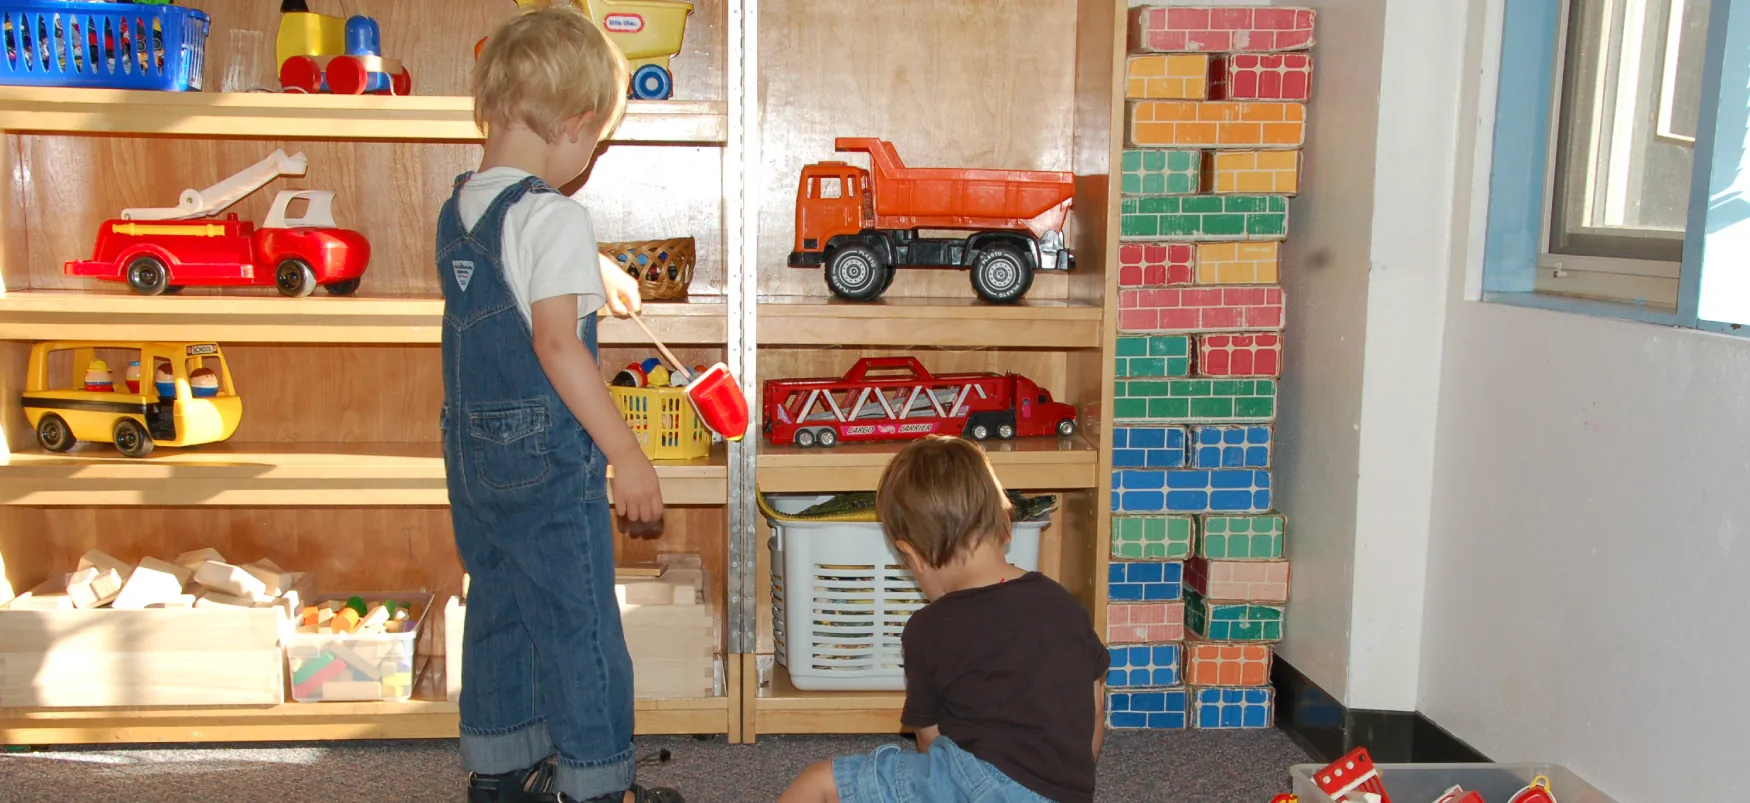 Two children are in front of shelves that are filled with toys such as trucks, buses, and building bricks.